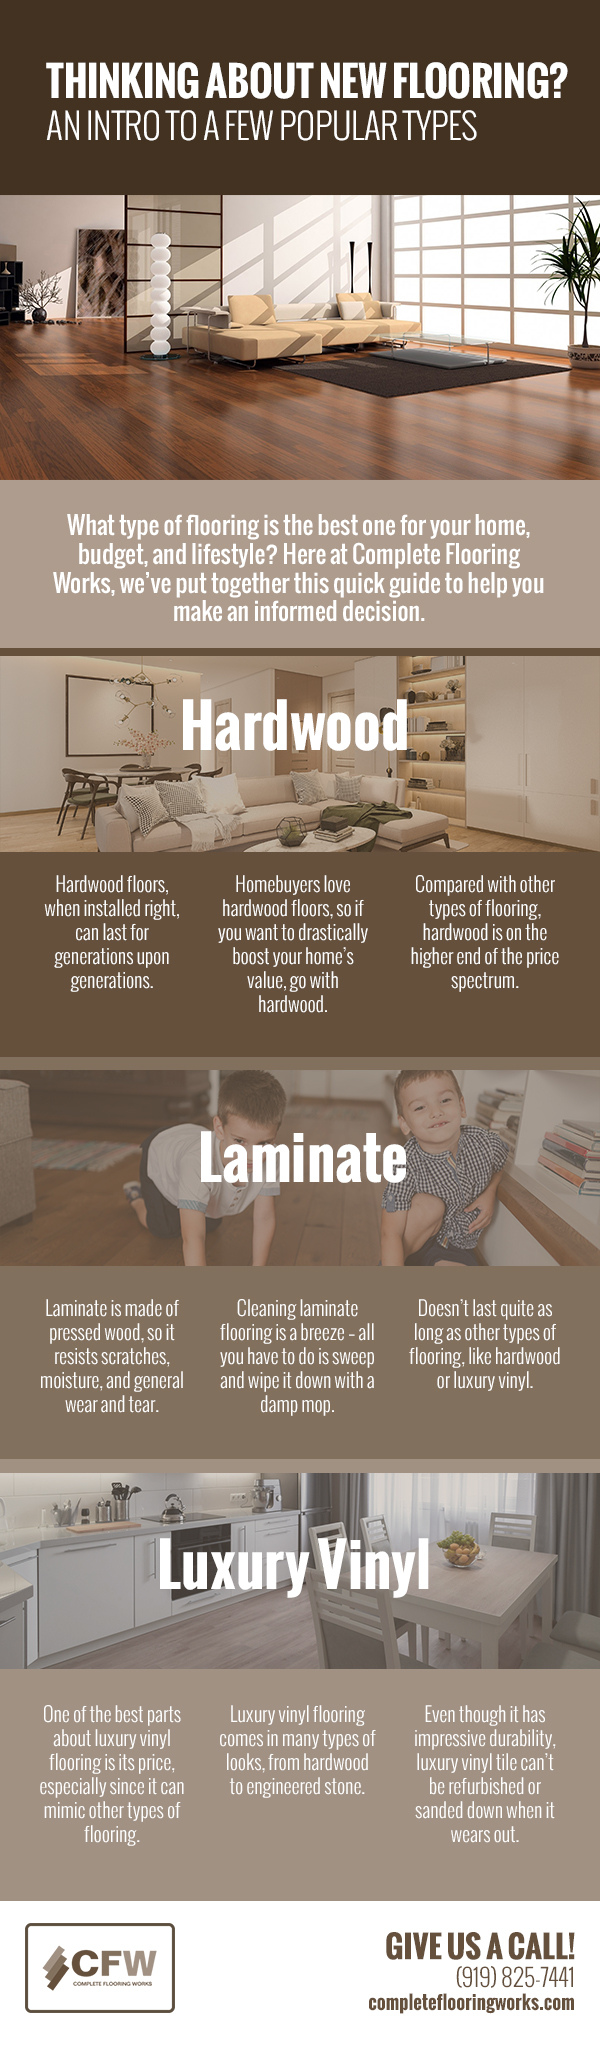 Thinking About New Flooring? An Intro to a Few Popular Types [Infographic]